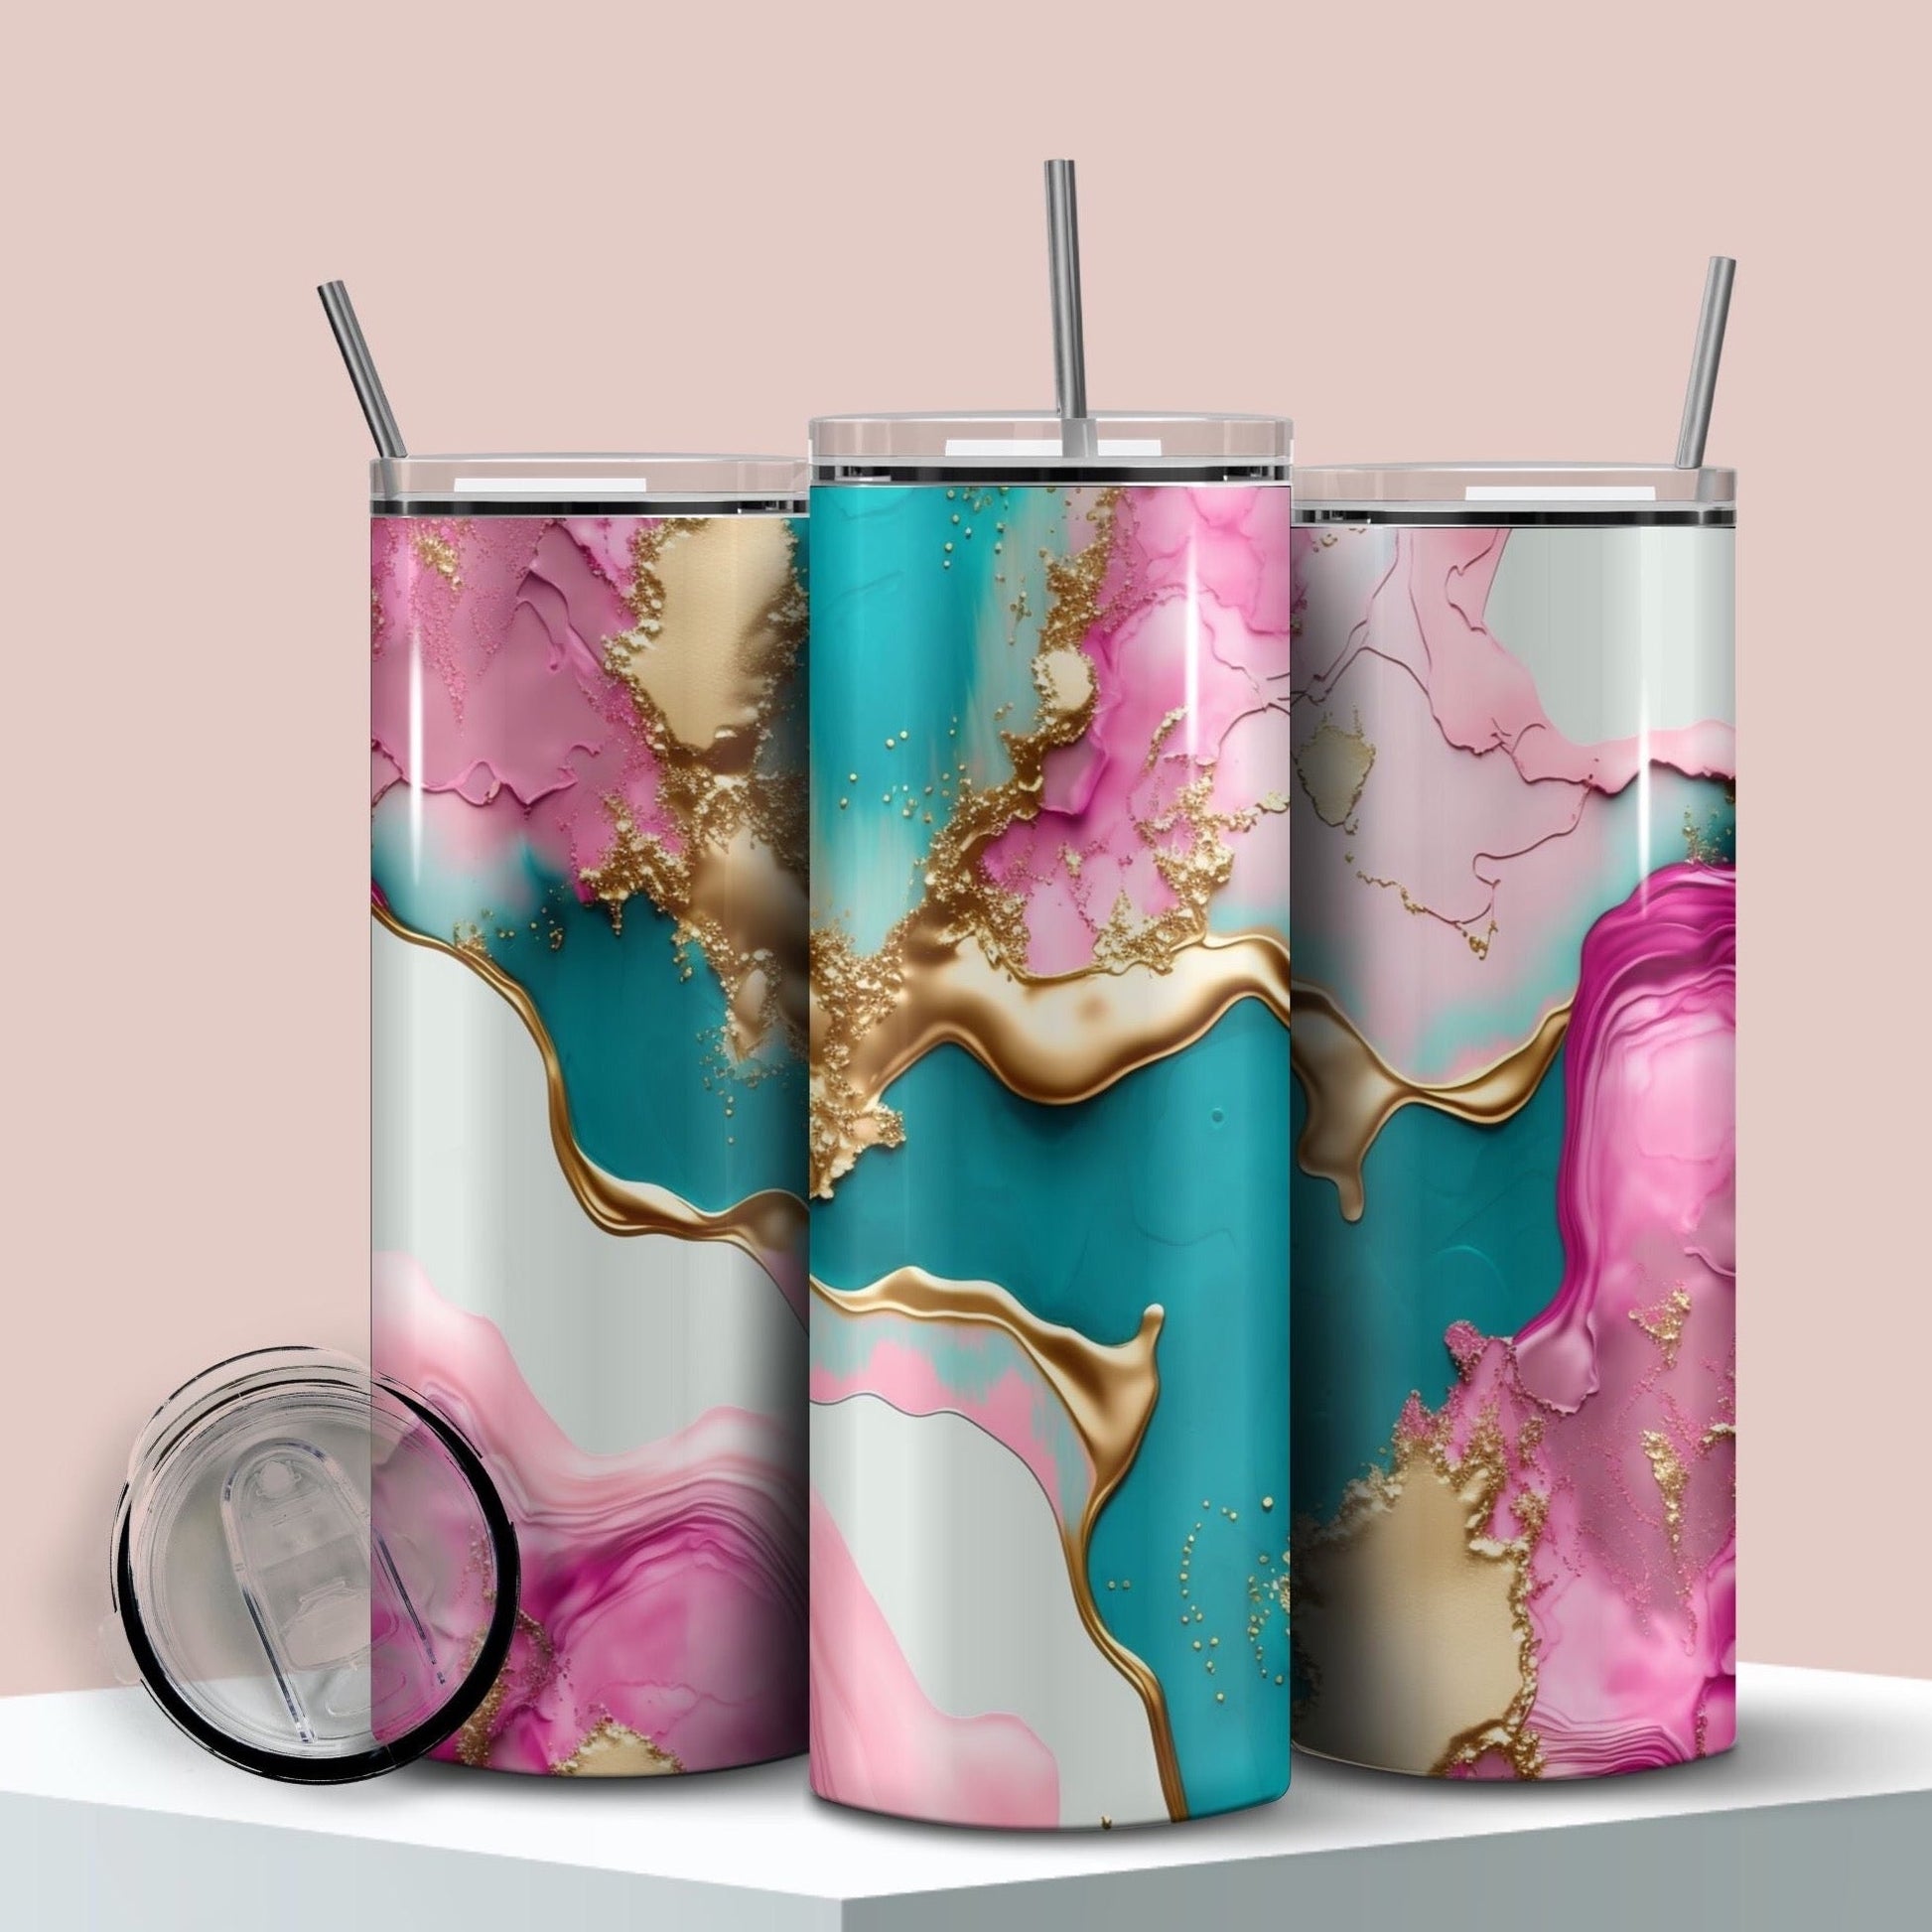 Pink Glitter Stainless Steel Sublimation Skinny Tumbler - 20oz.